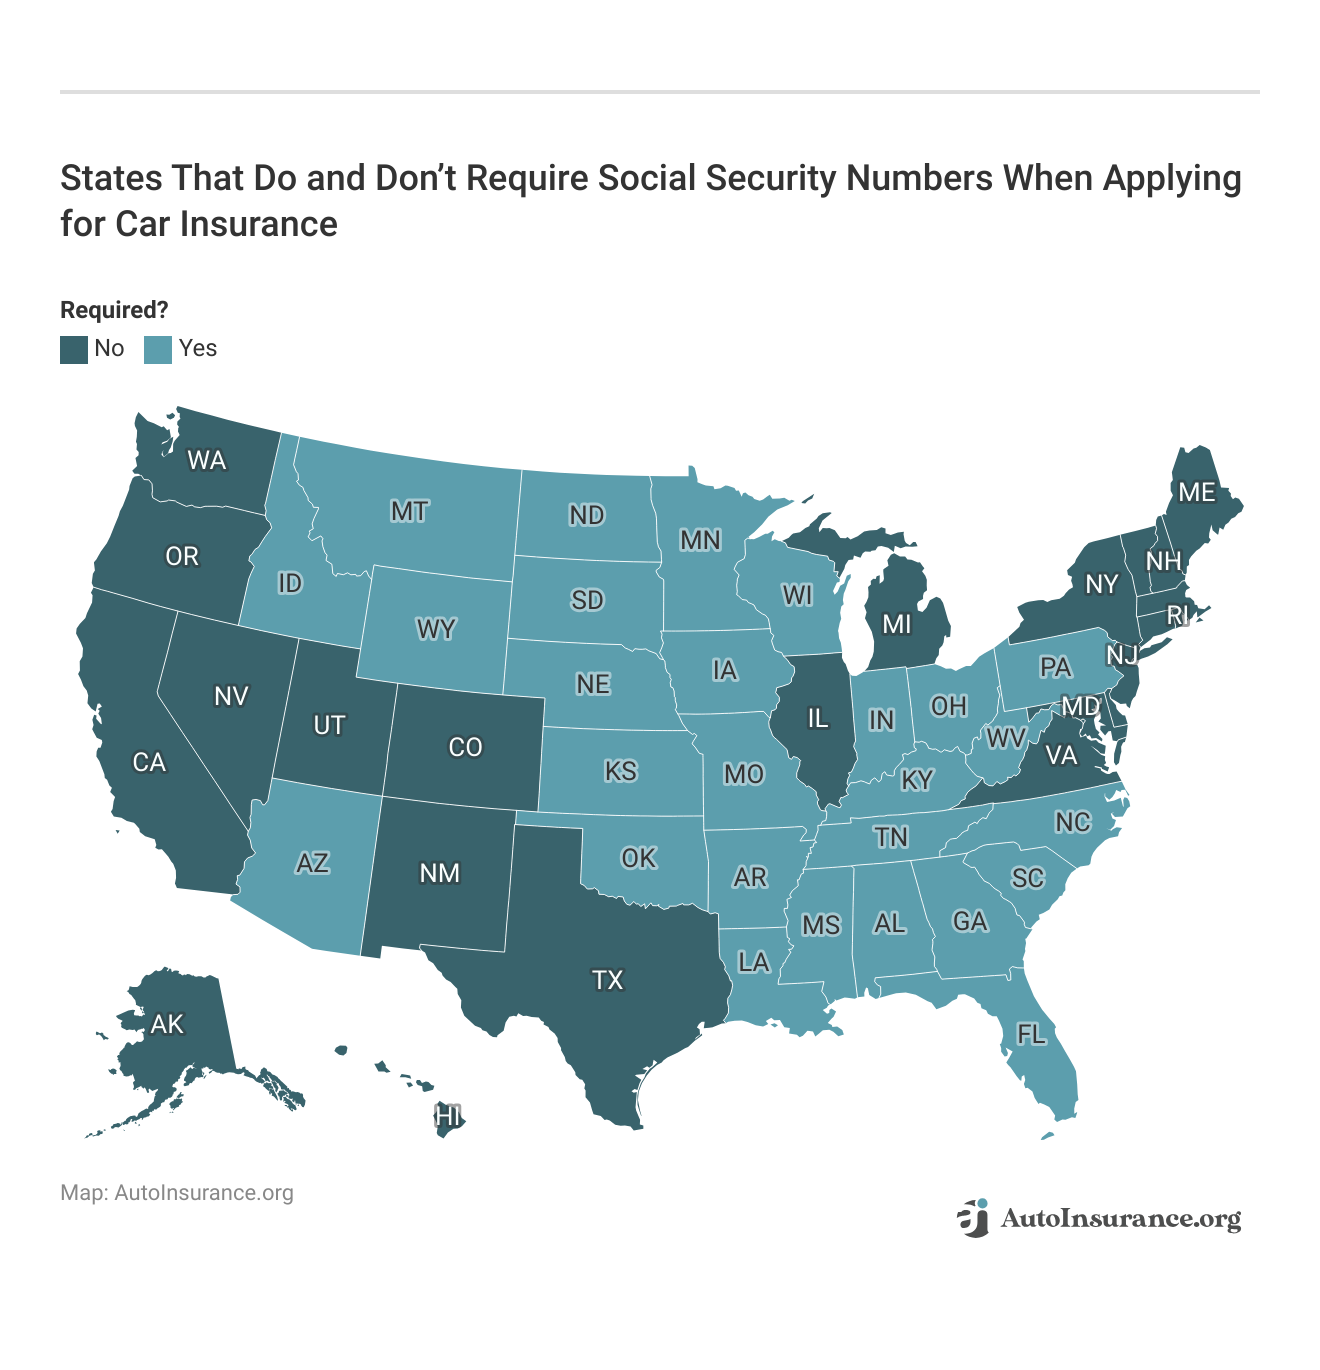 <h3>States That Do and Don’t Require Social Security Numbers When Applying for Car Insurance</h3>